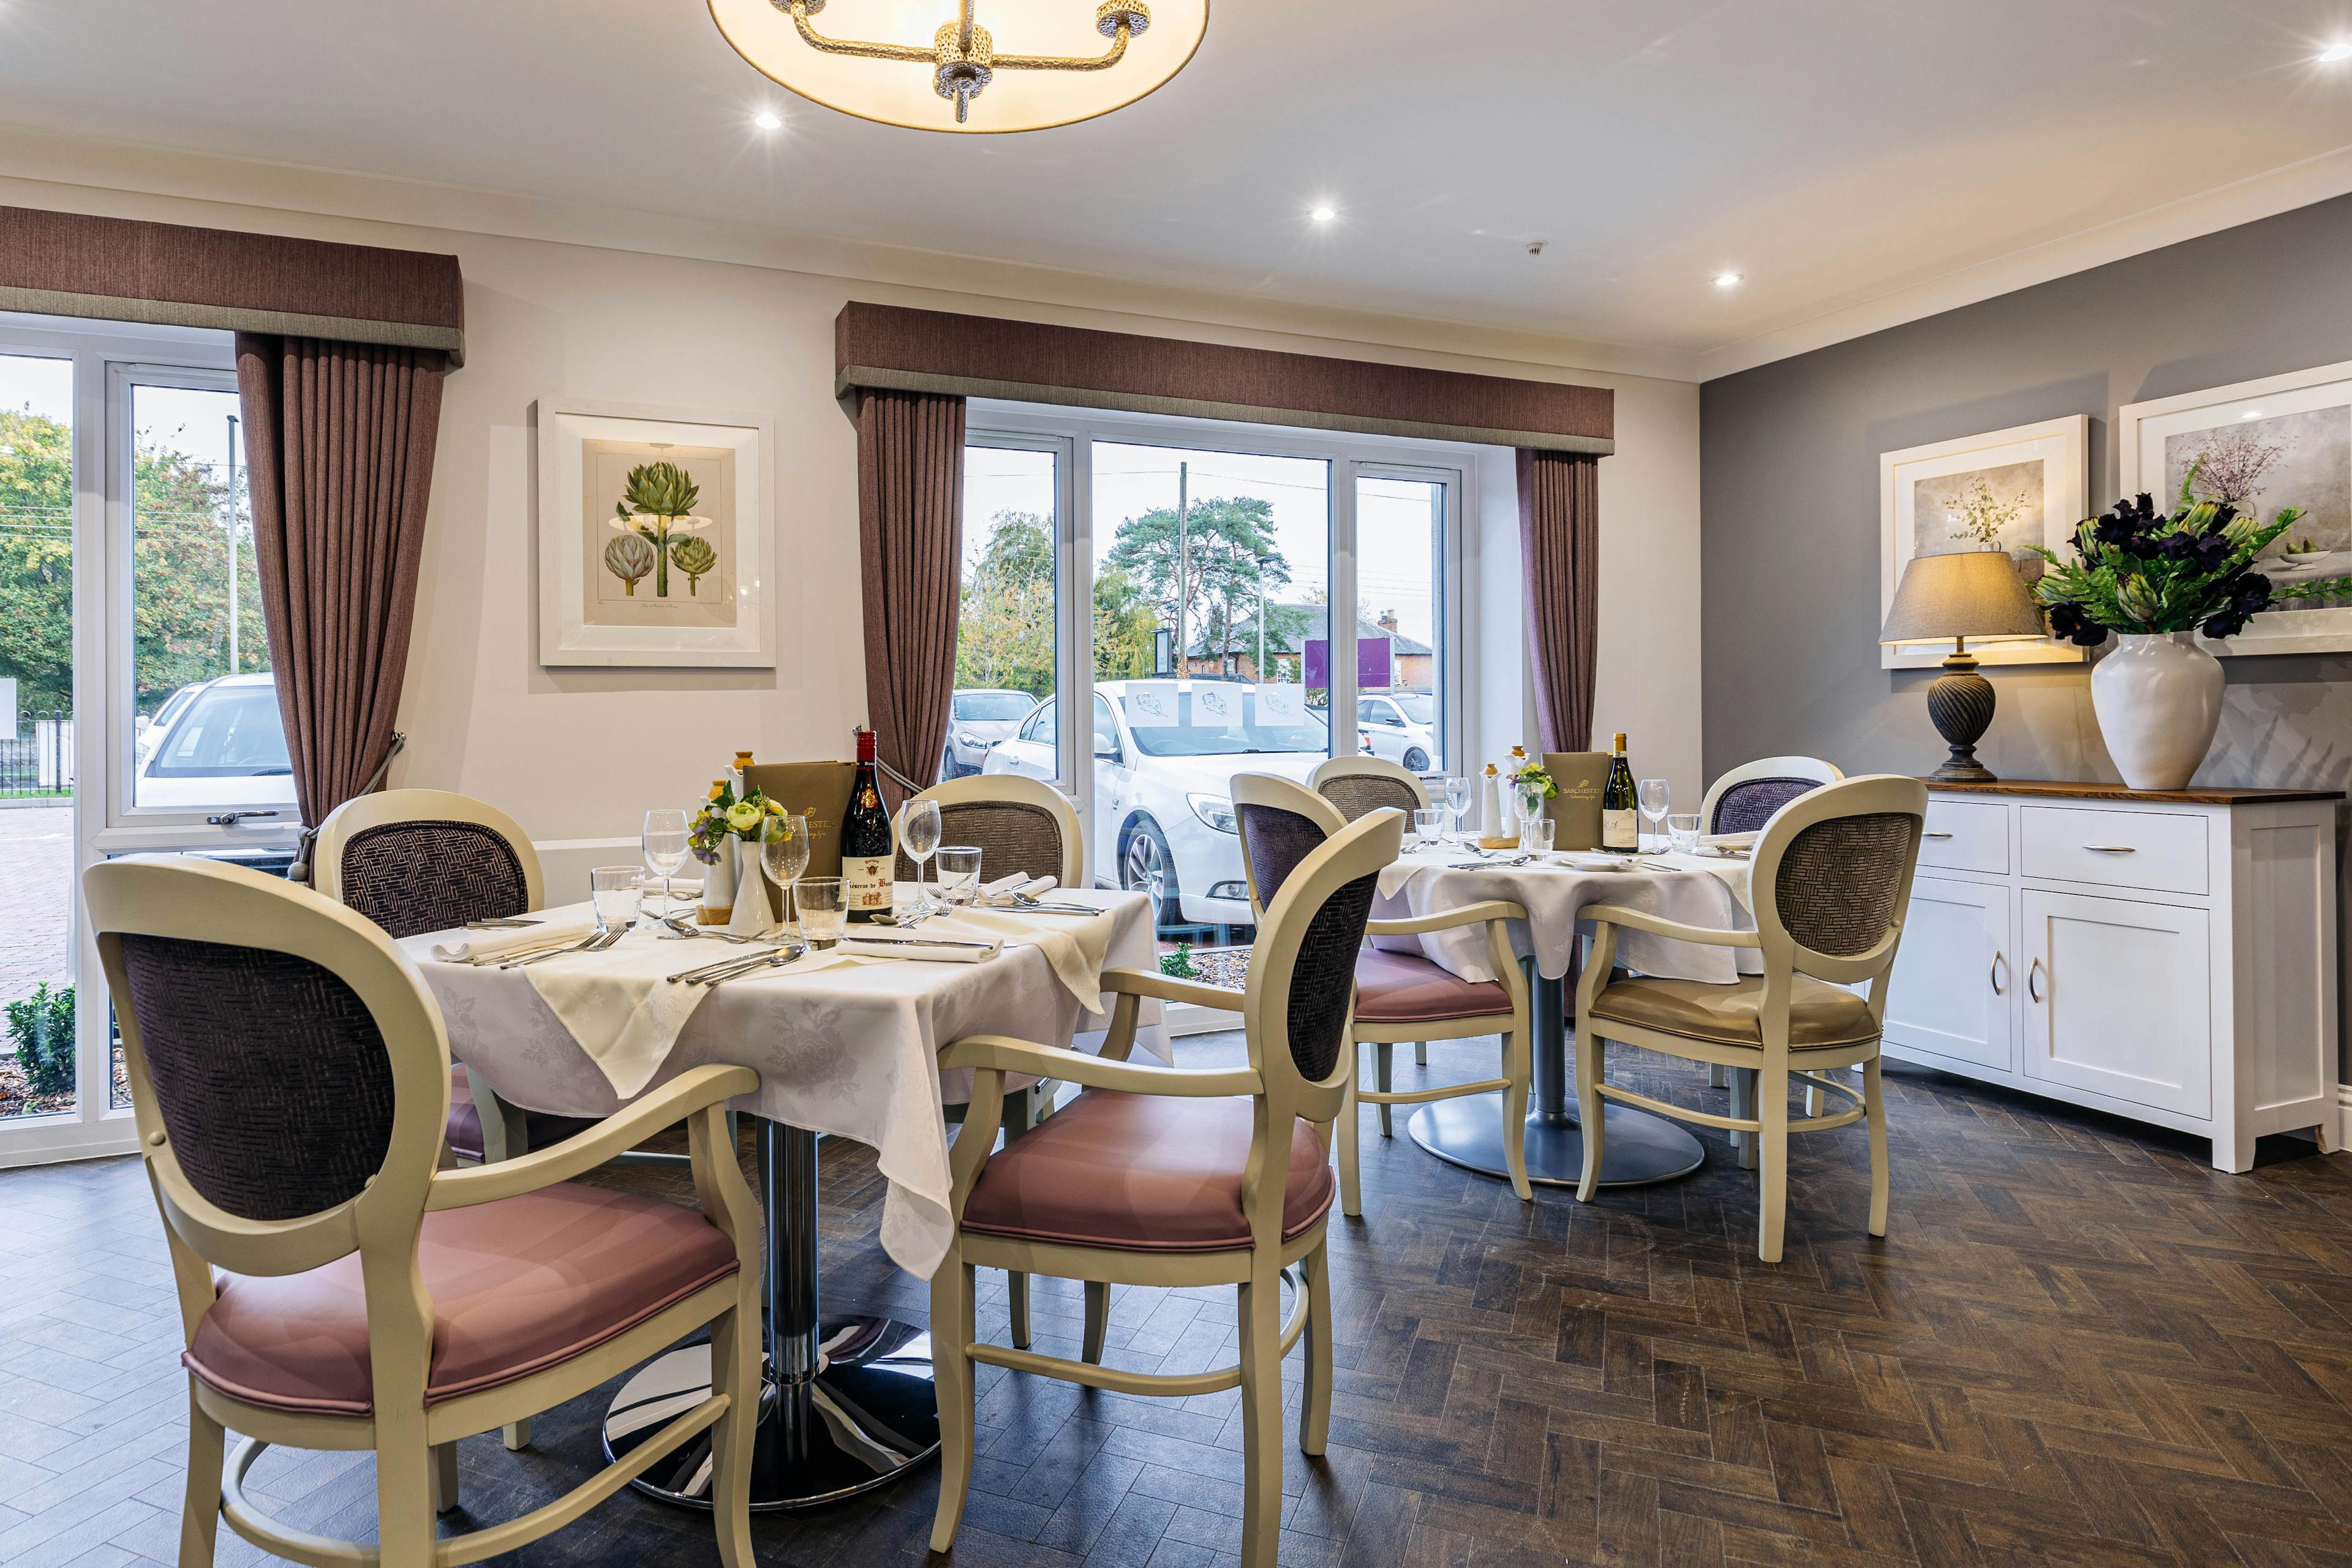 Dining Room at Parley Place Care Home in Ferndown, Dorset